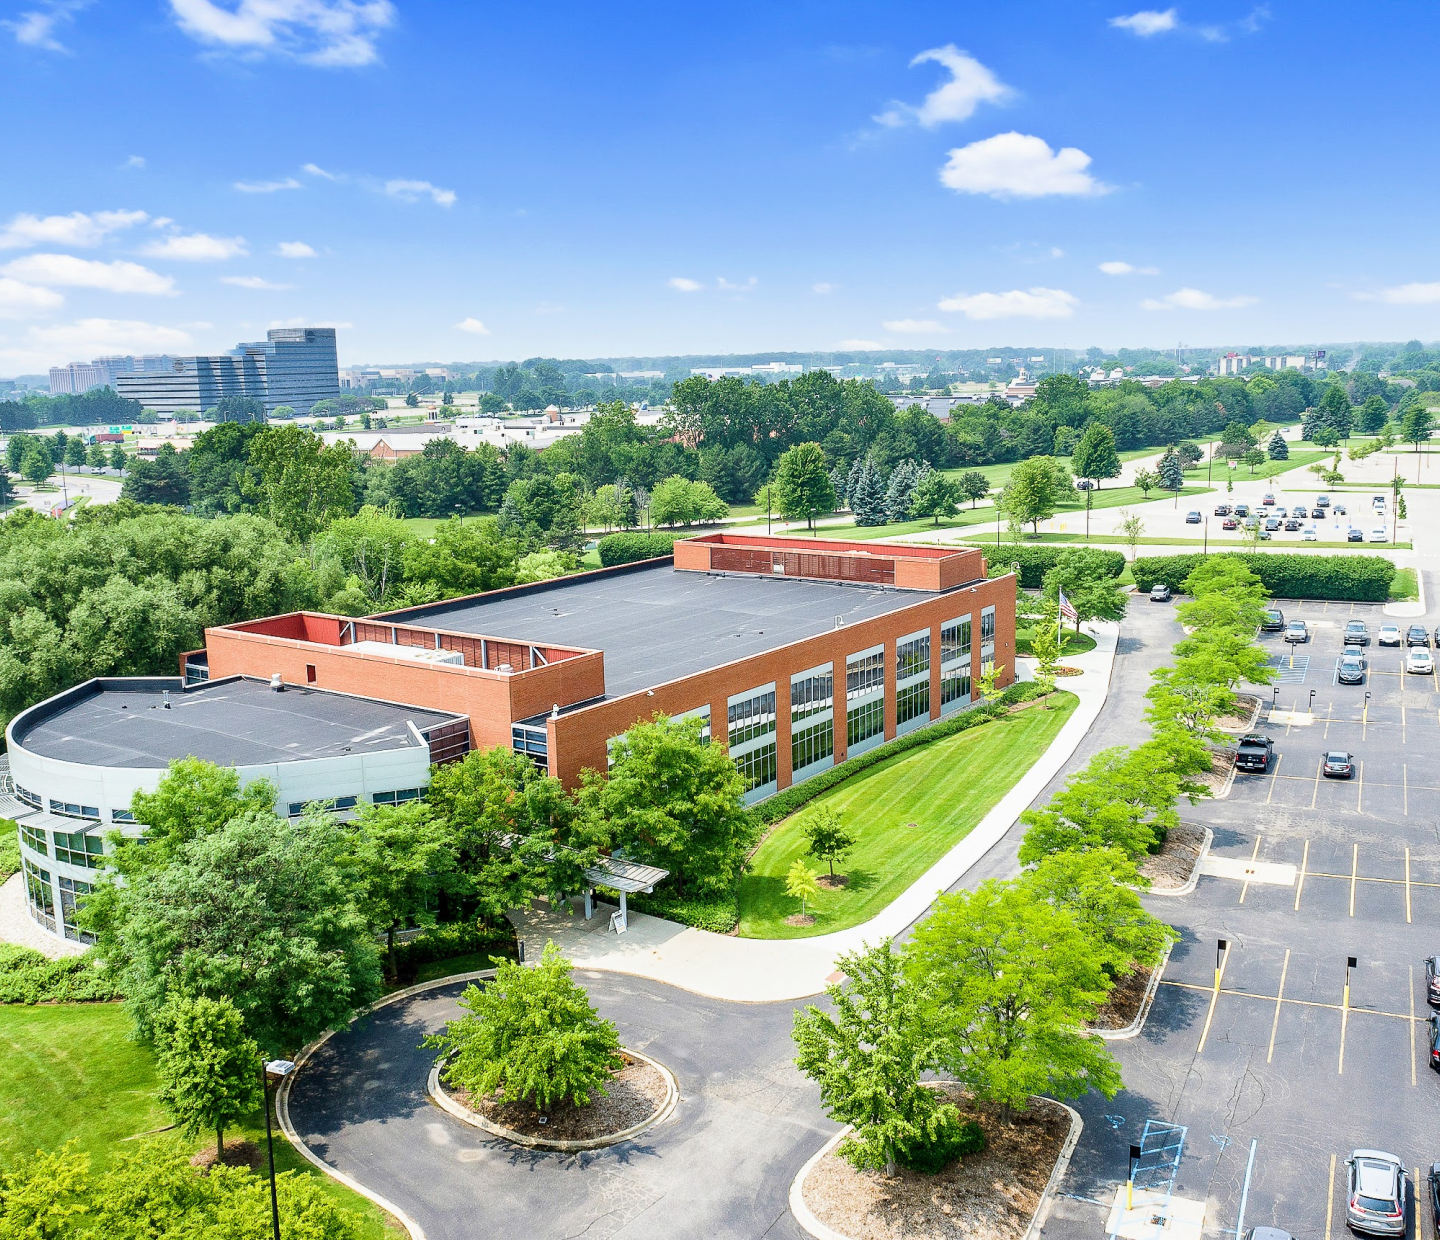 Syndicated Equities Acquires Carhartt Corporate Headquarters & Global Design Facility